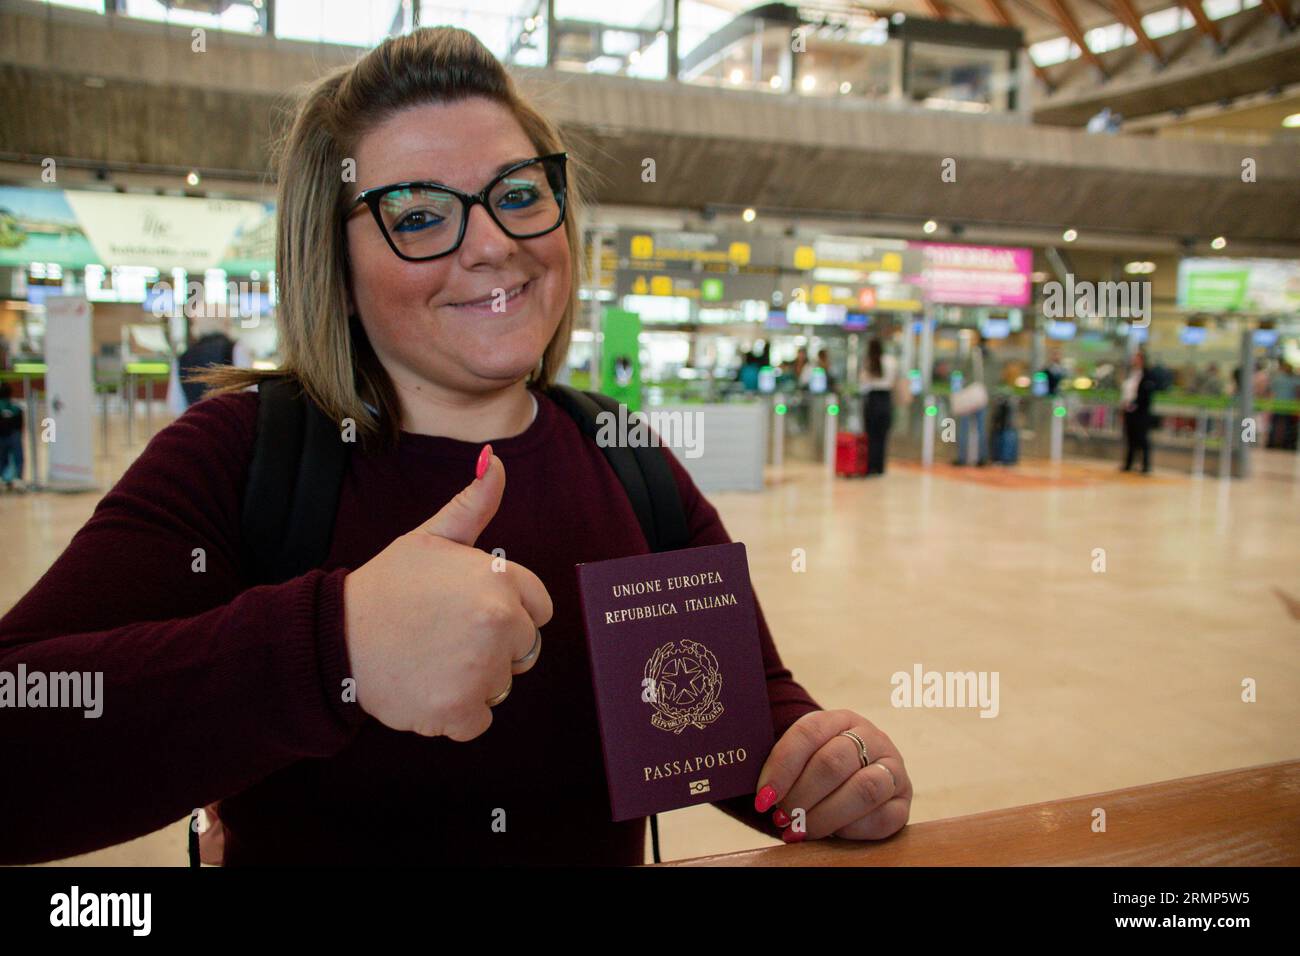 Thumbs up of an Italian female passenger showing her passport at the airport before leave Stock Photo